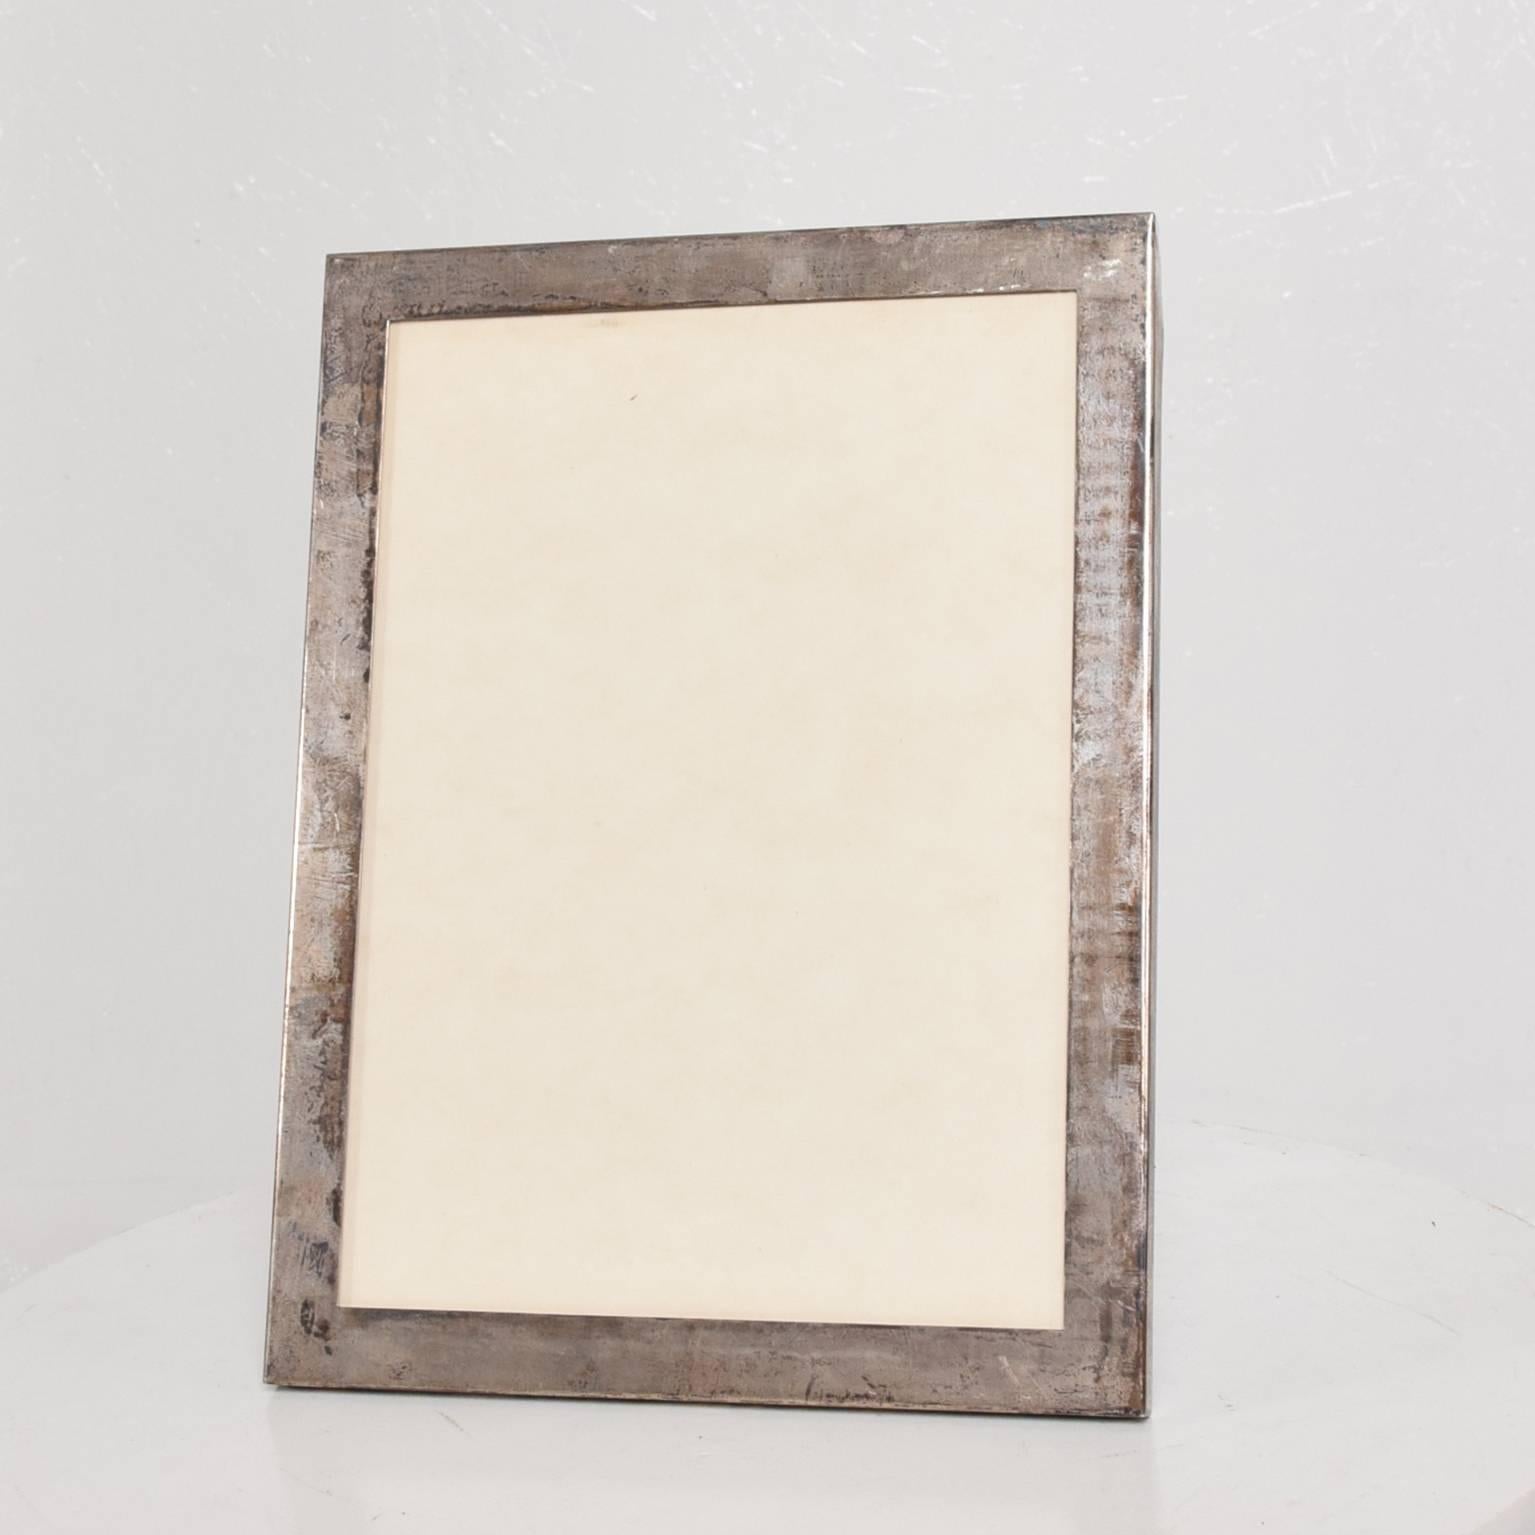 For your consideration a vintage picture frame in Sterling. Stamped G W D Sterling, 10.
The USA, circa 1960s.
Original vintage patina with green velvet back. 
Dimensions: 9 1/4